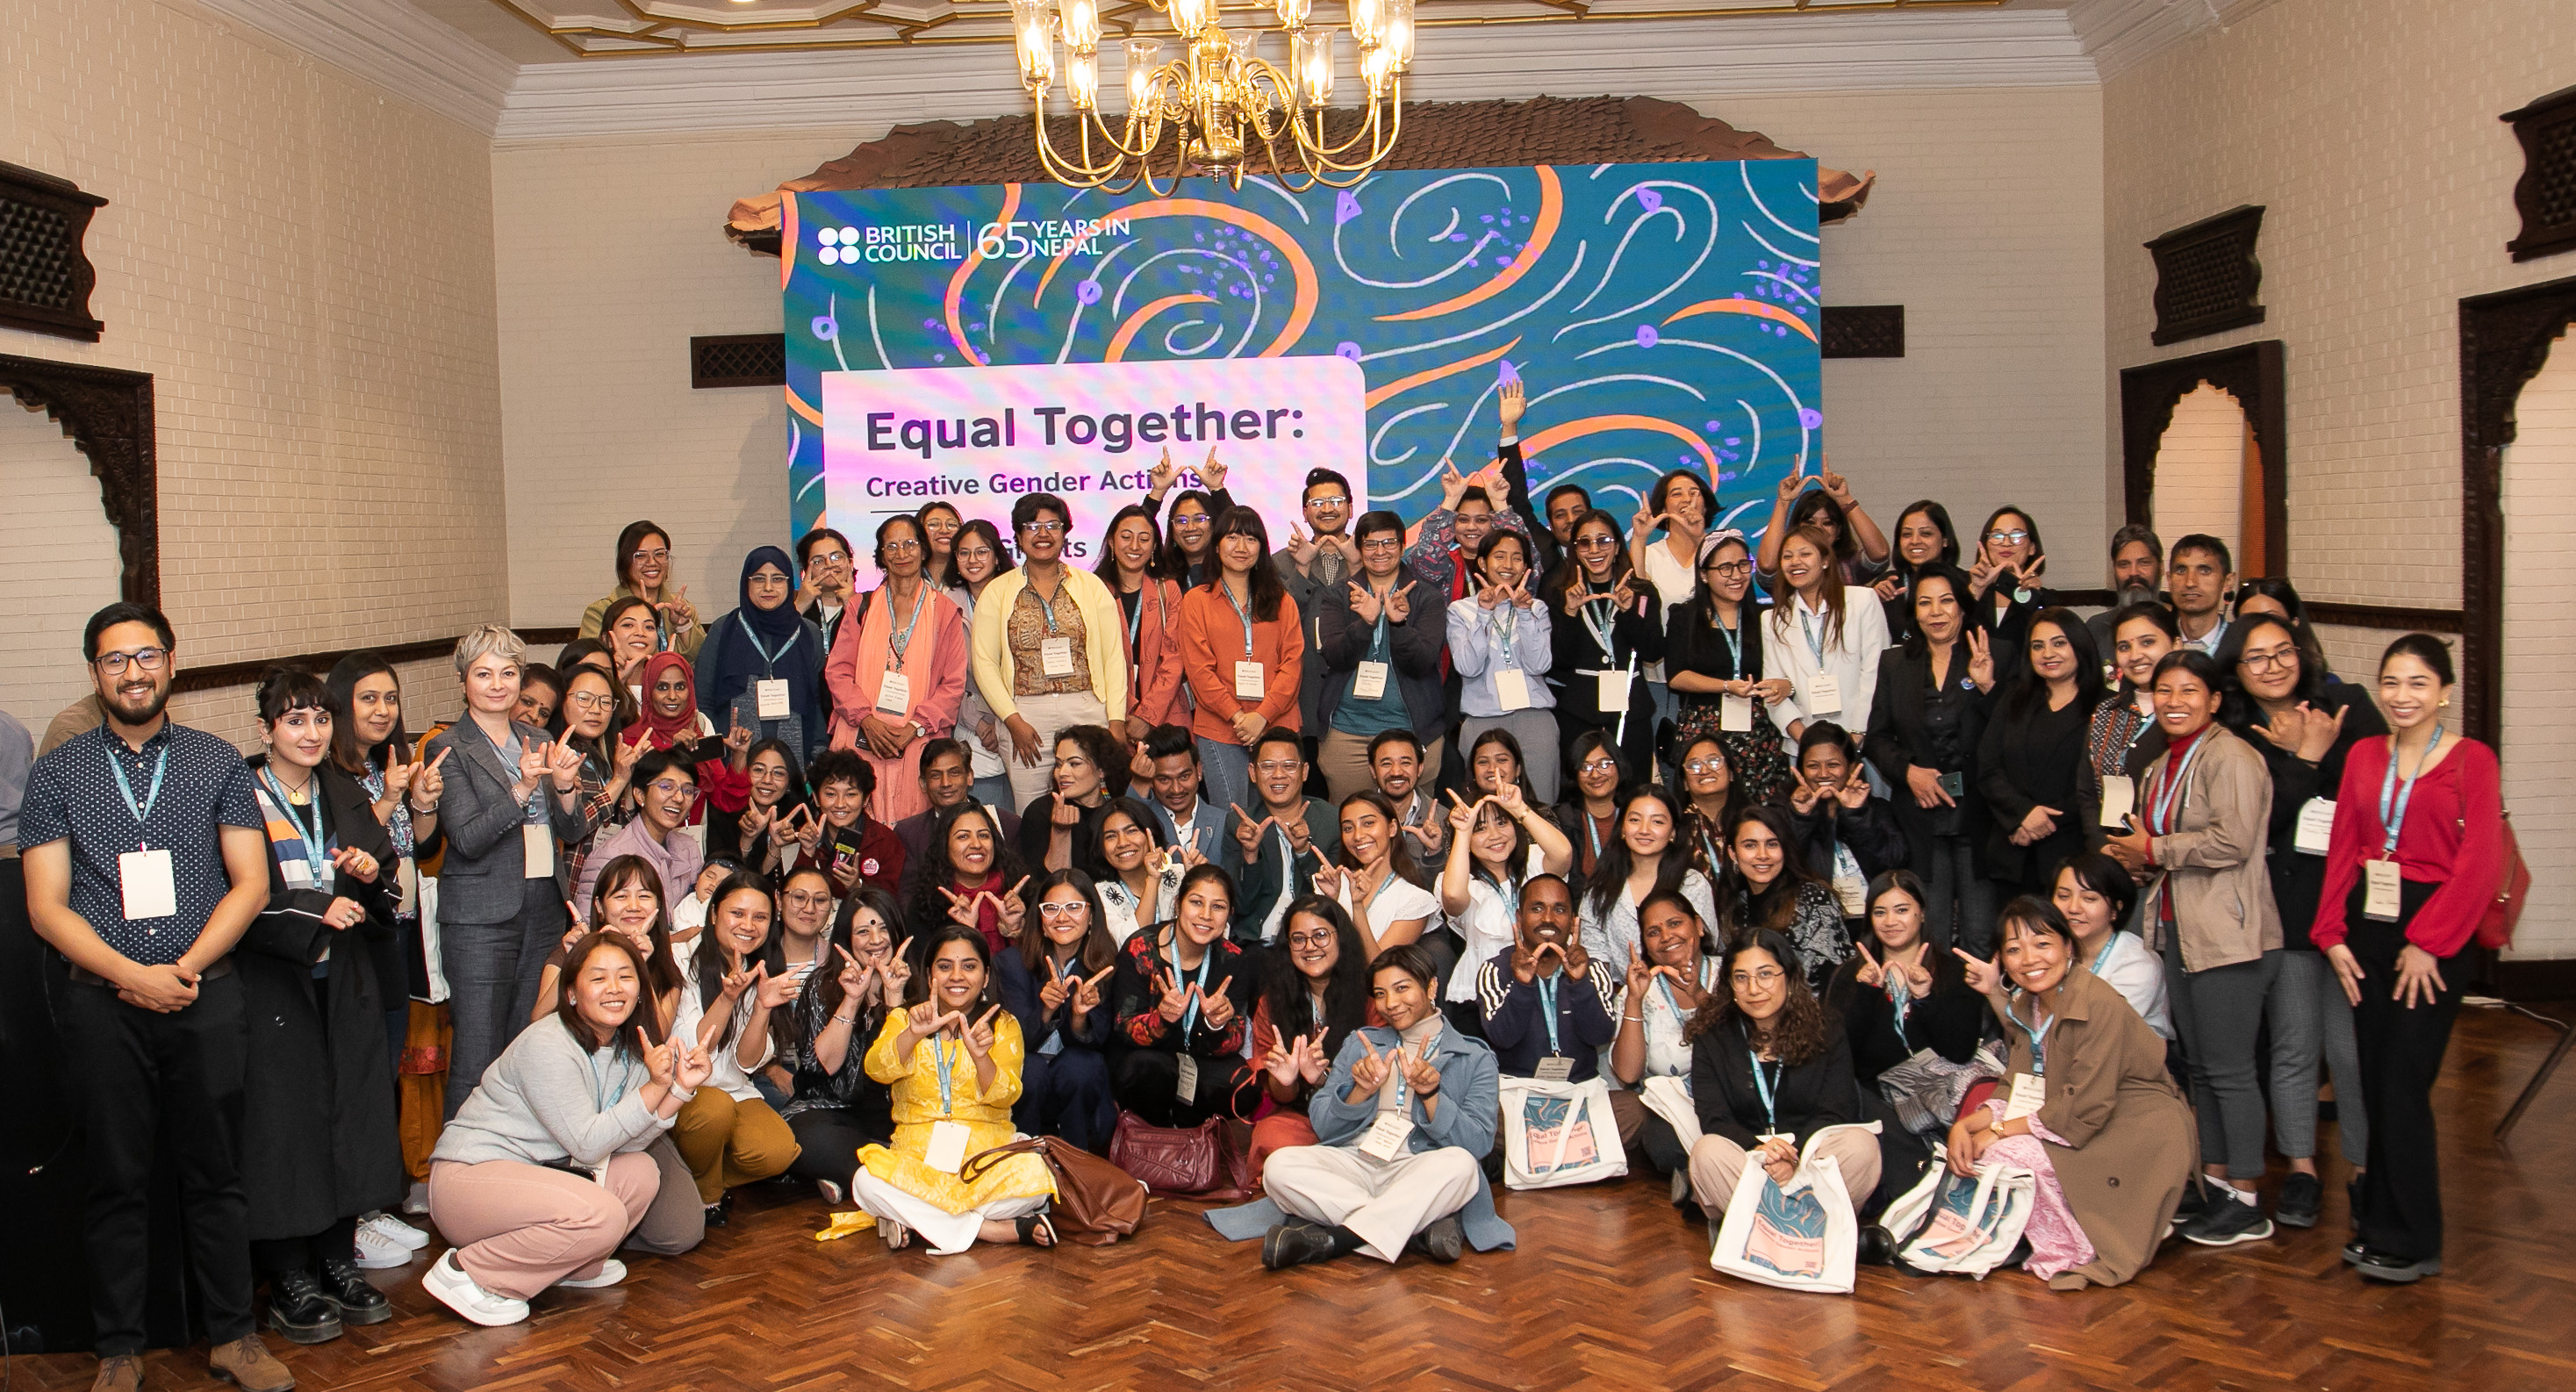 Equal Together: Creative Gender Actions concludes